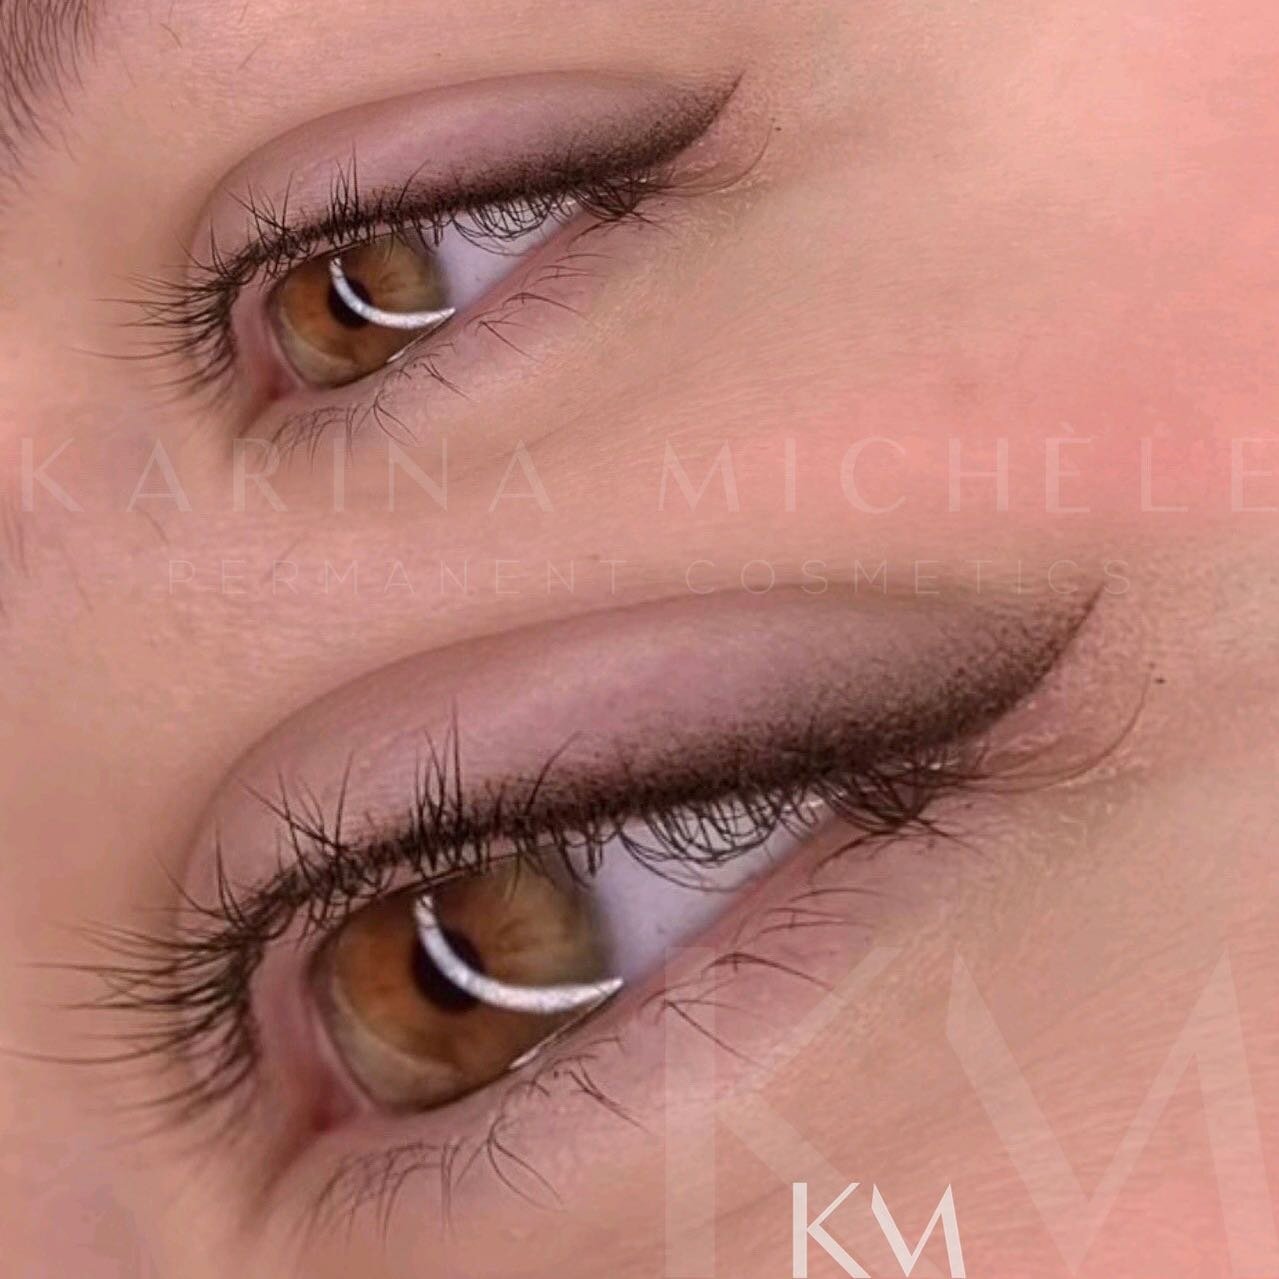 ✨This is one of my favorite techniques . A super soft shaded wing eyeliner. ✨

This technique is so soft and beautiful but it&rsquo;s not for everyone. You have to really have the right eye shape and size for it. This is also fairly permanent! So mak